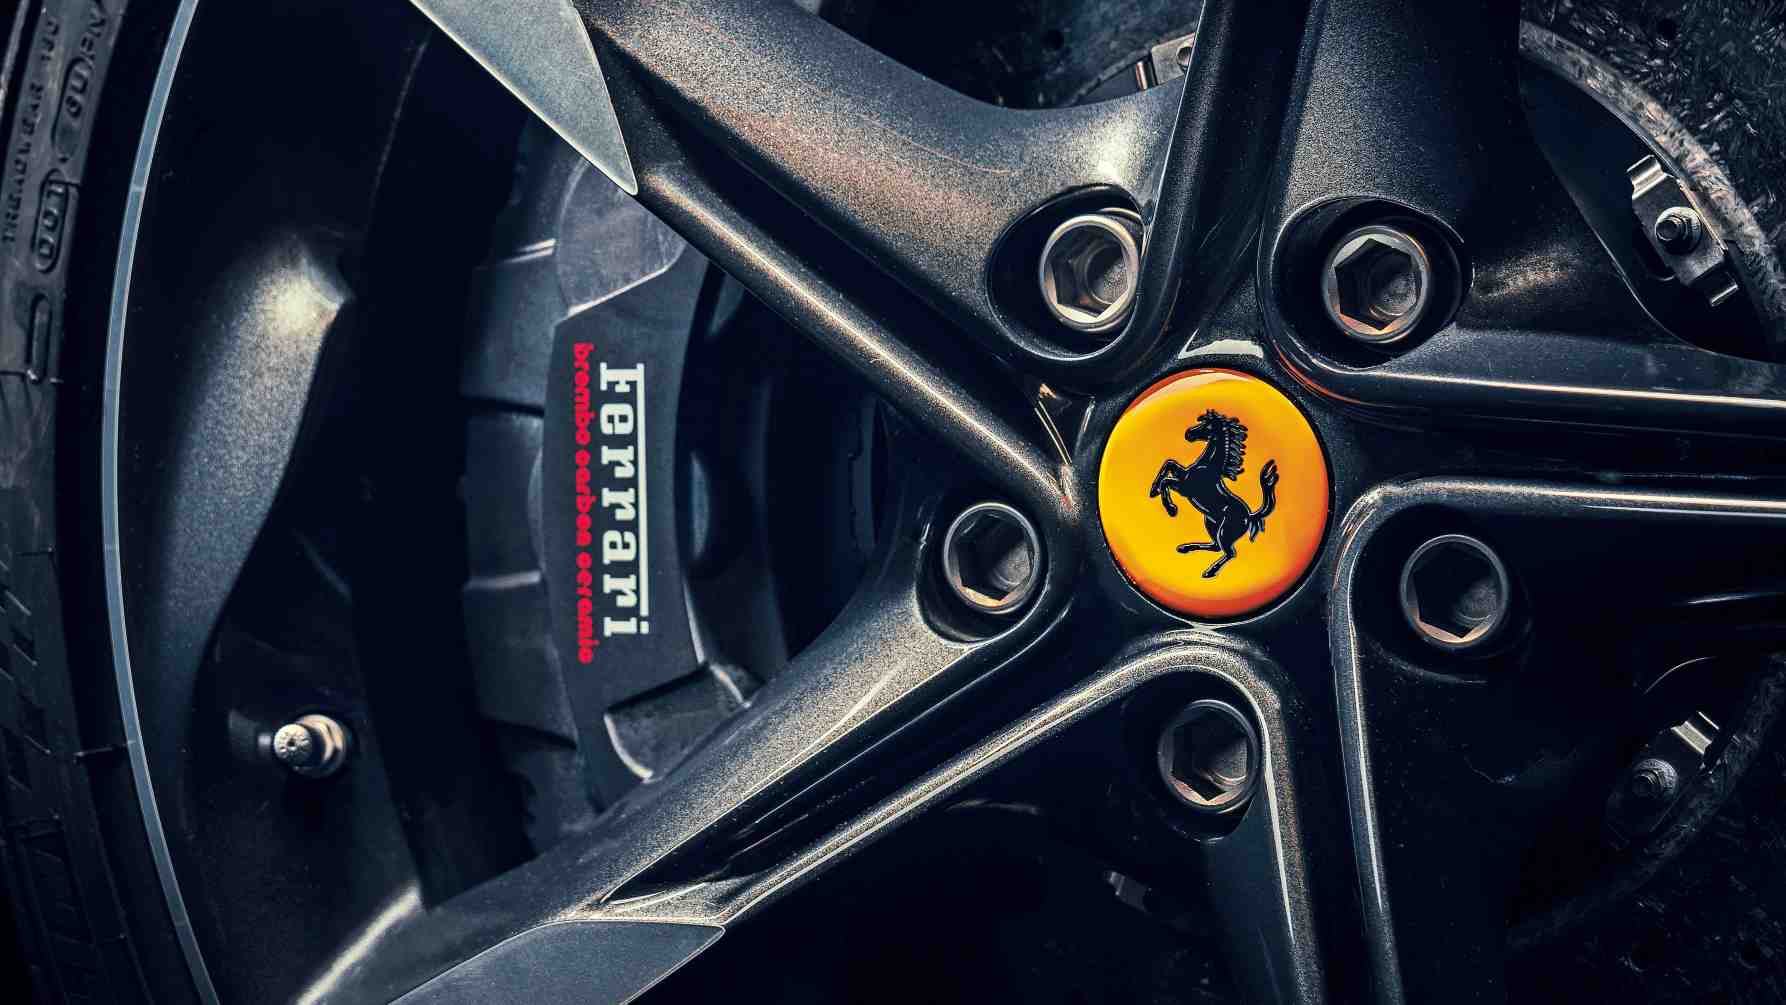 Ferrari expects its sales to rise considerably once its 'Purosangue' SUV is on the market. Image: Ferrari